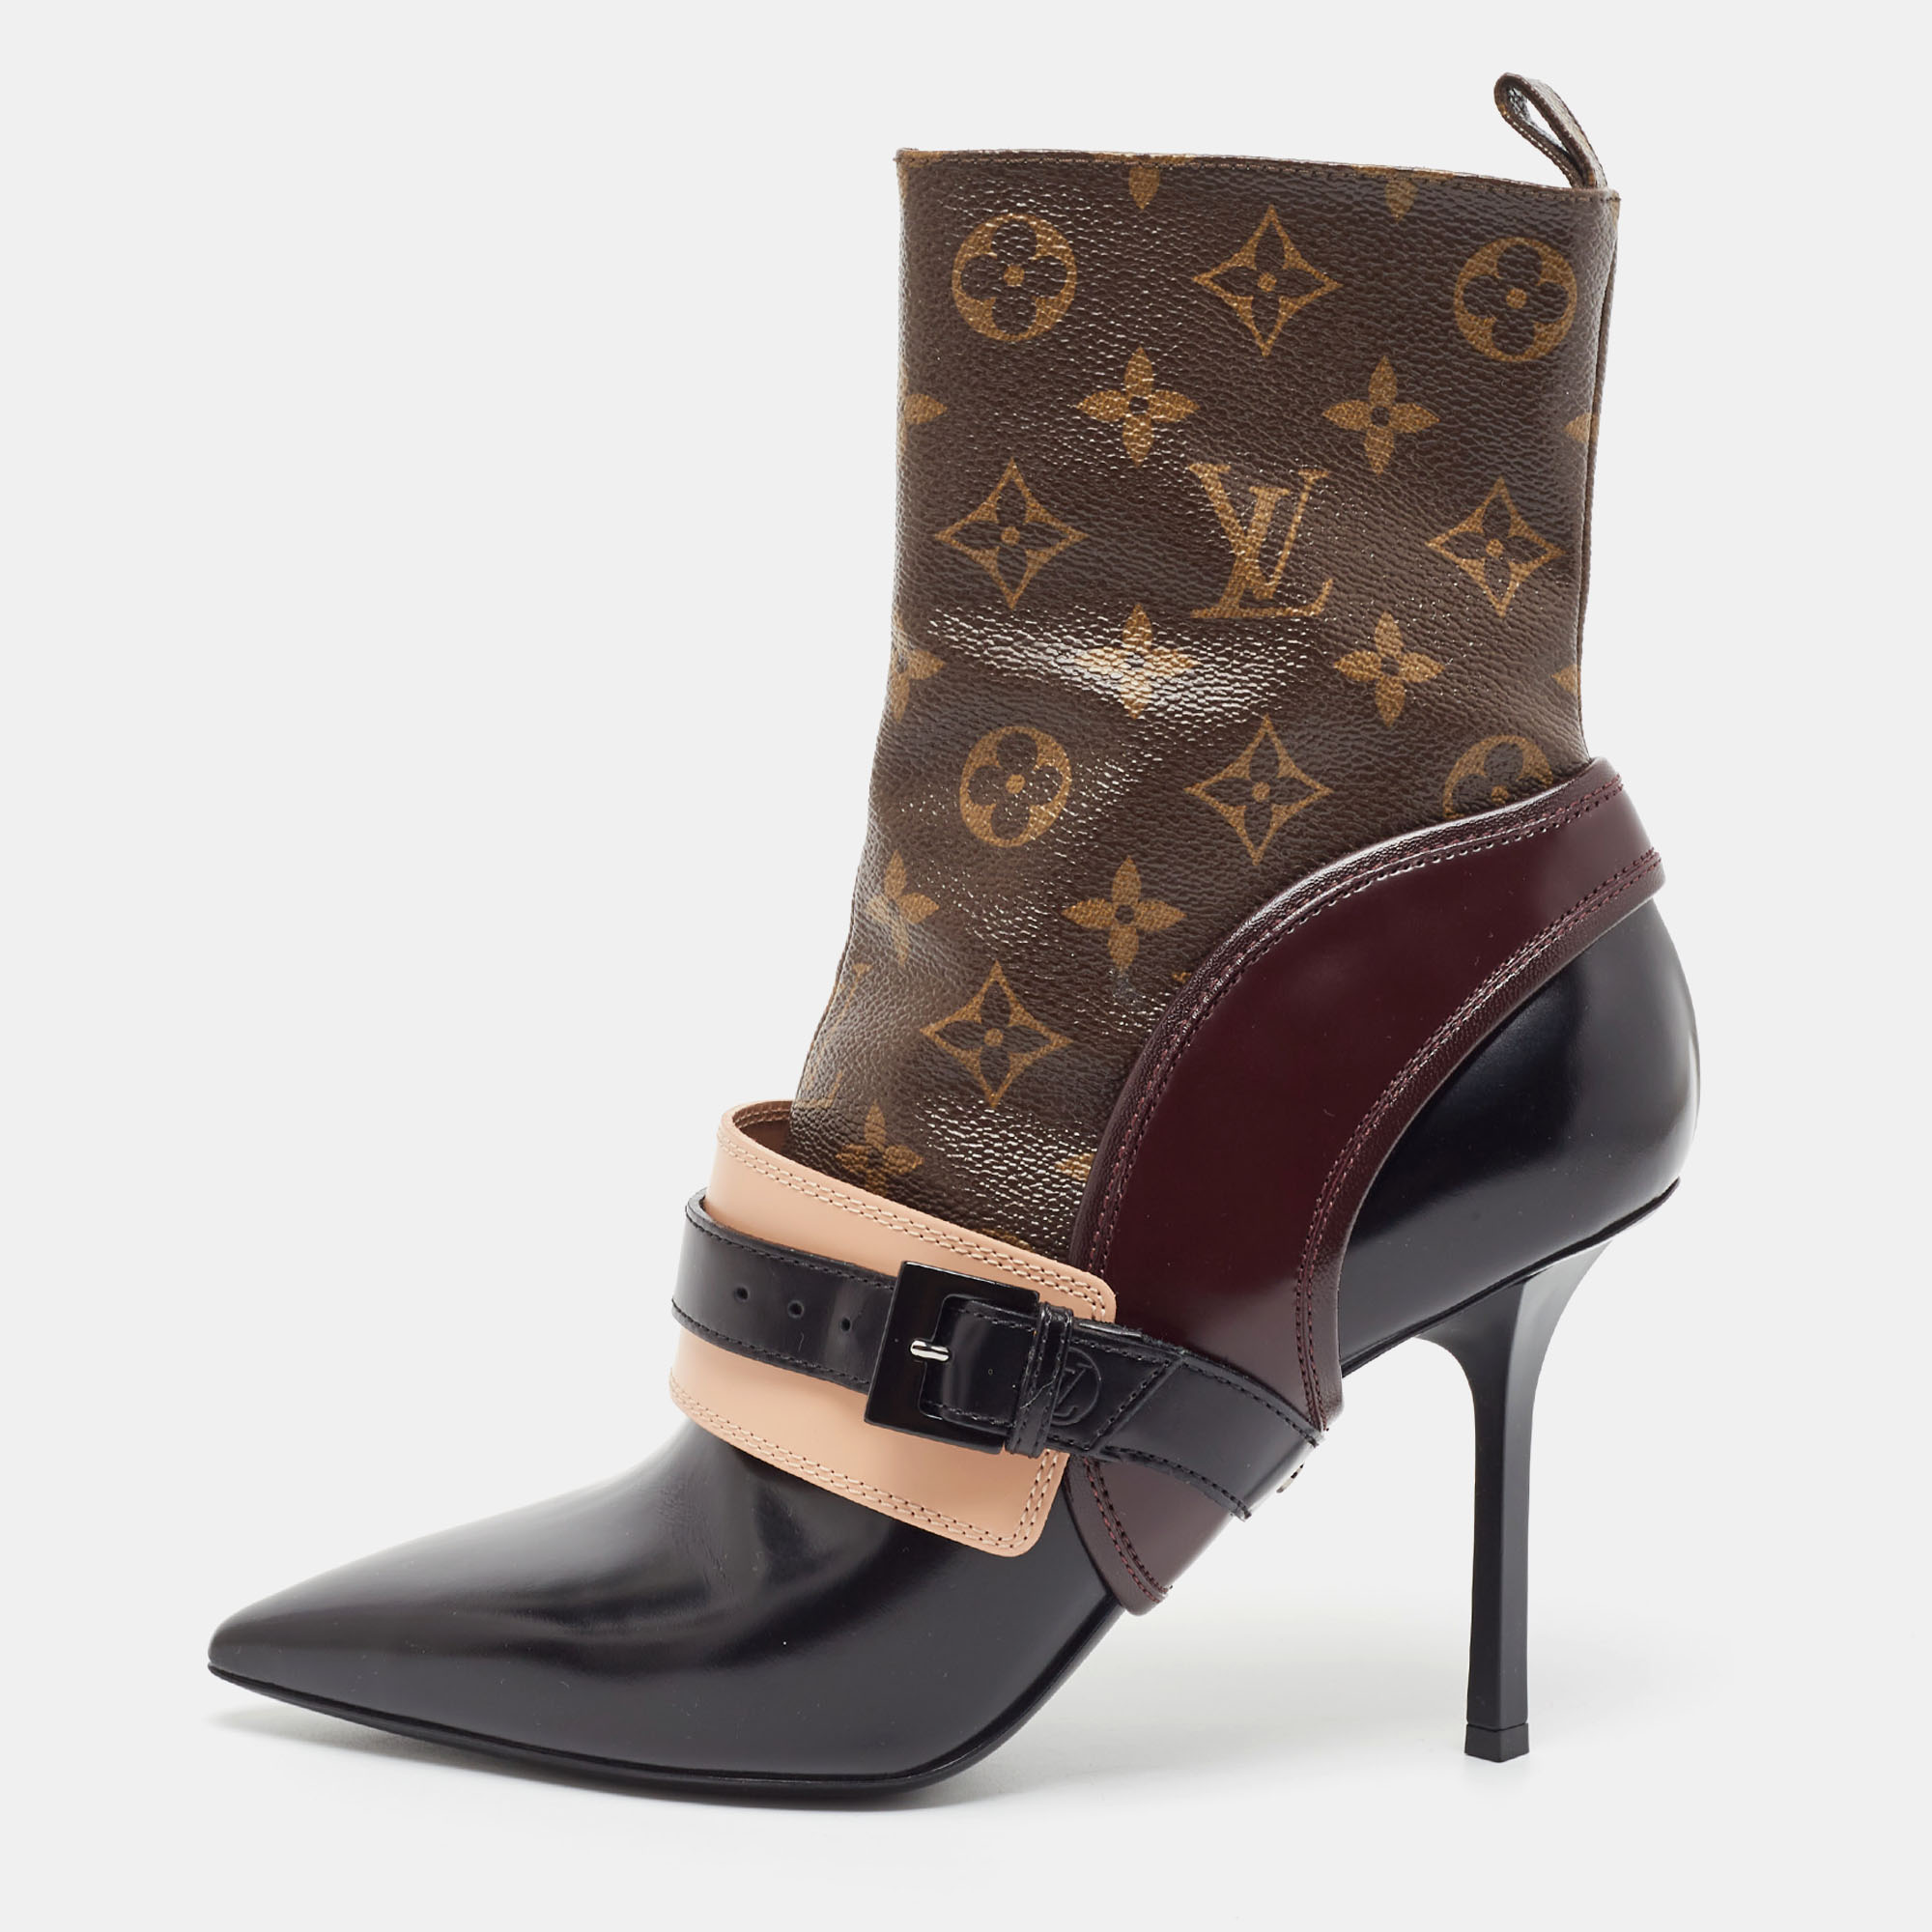 Louis Vuitton Monogram Canvas And Leather Ankle Boots Size 38.5